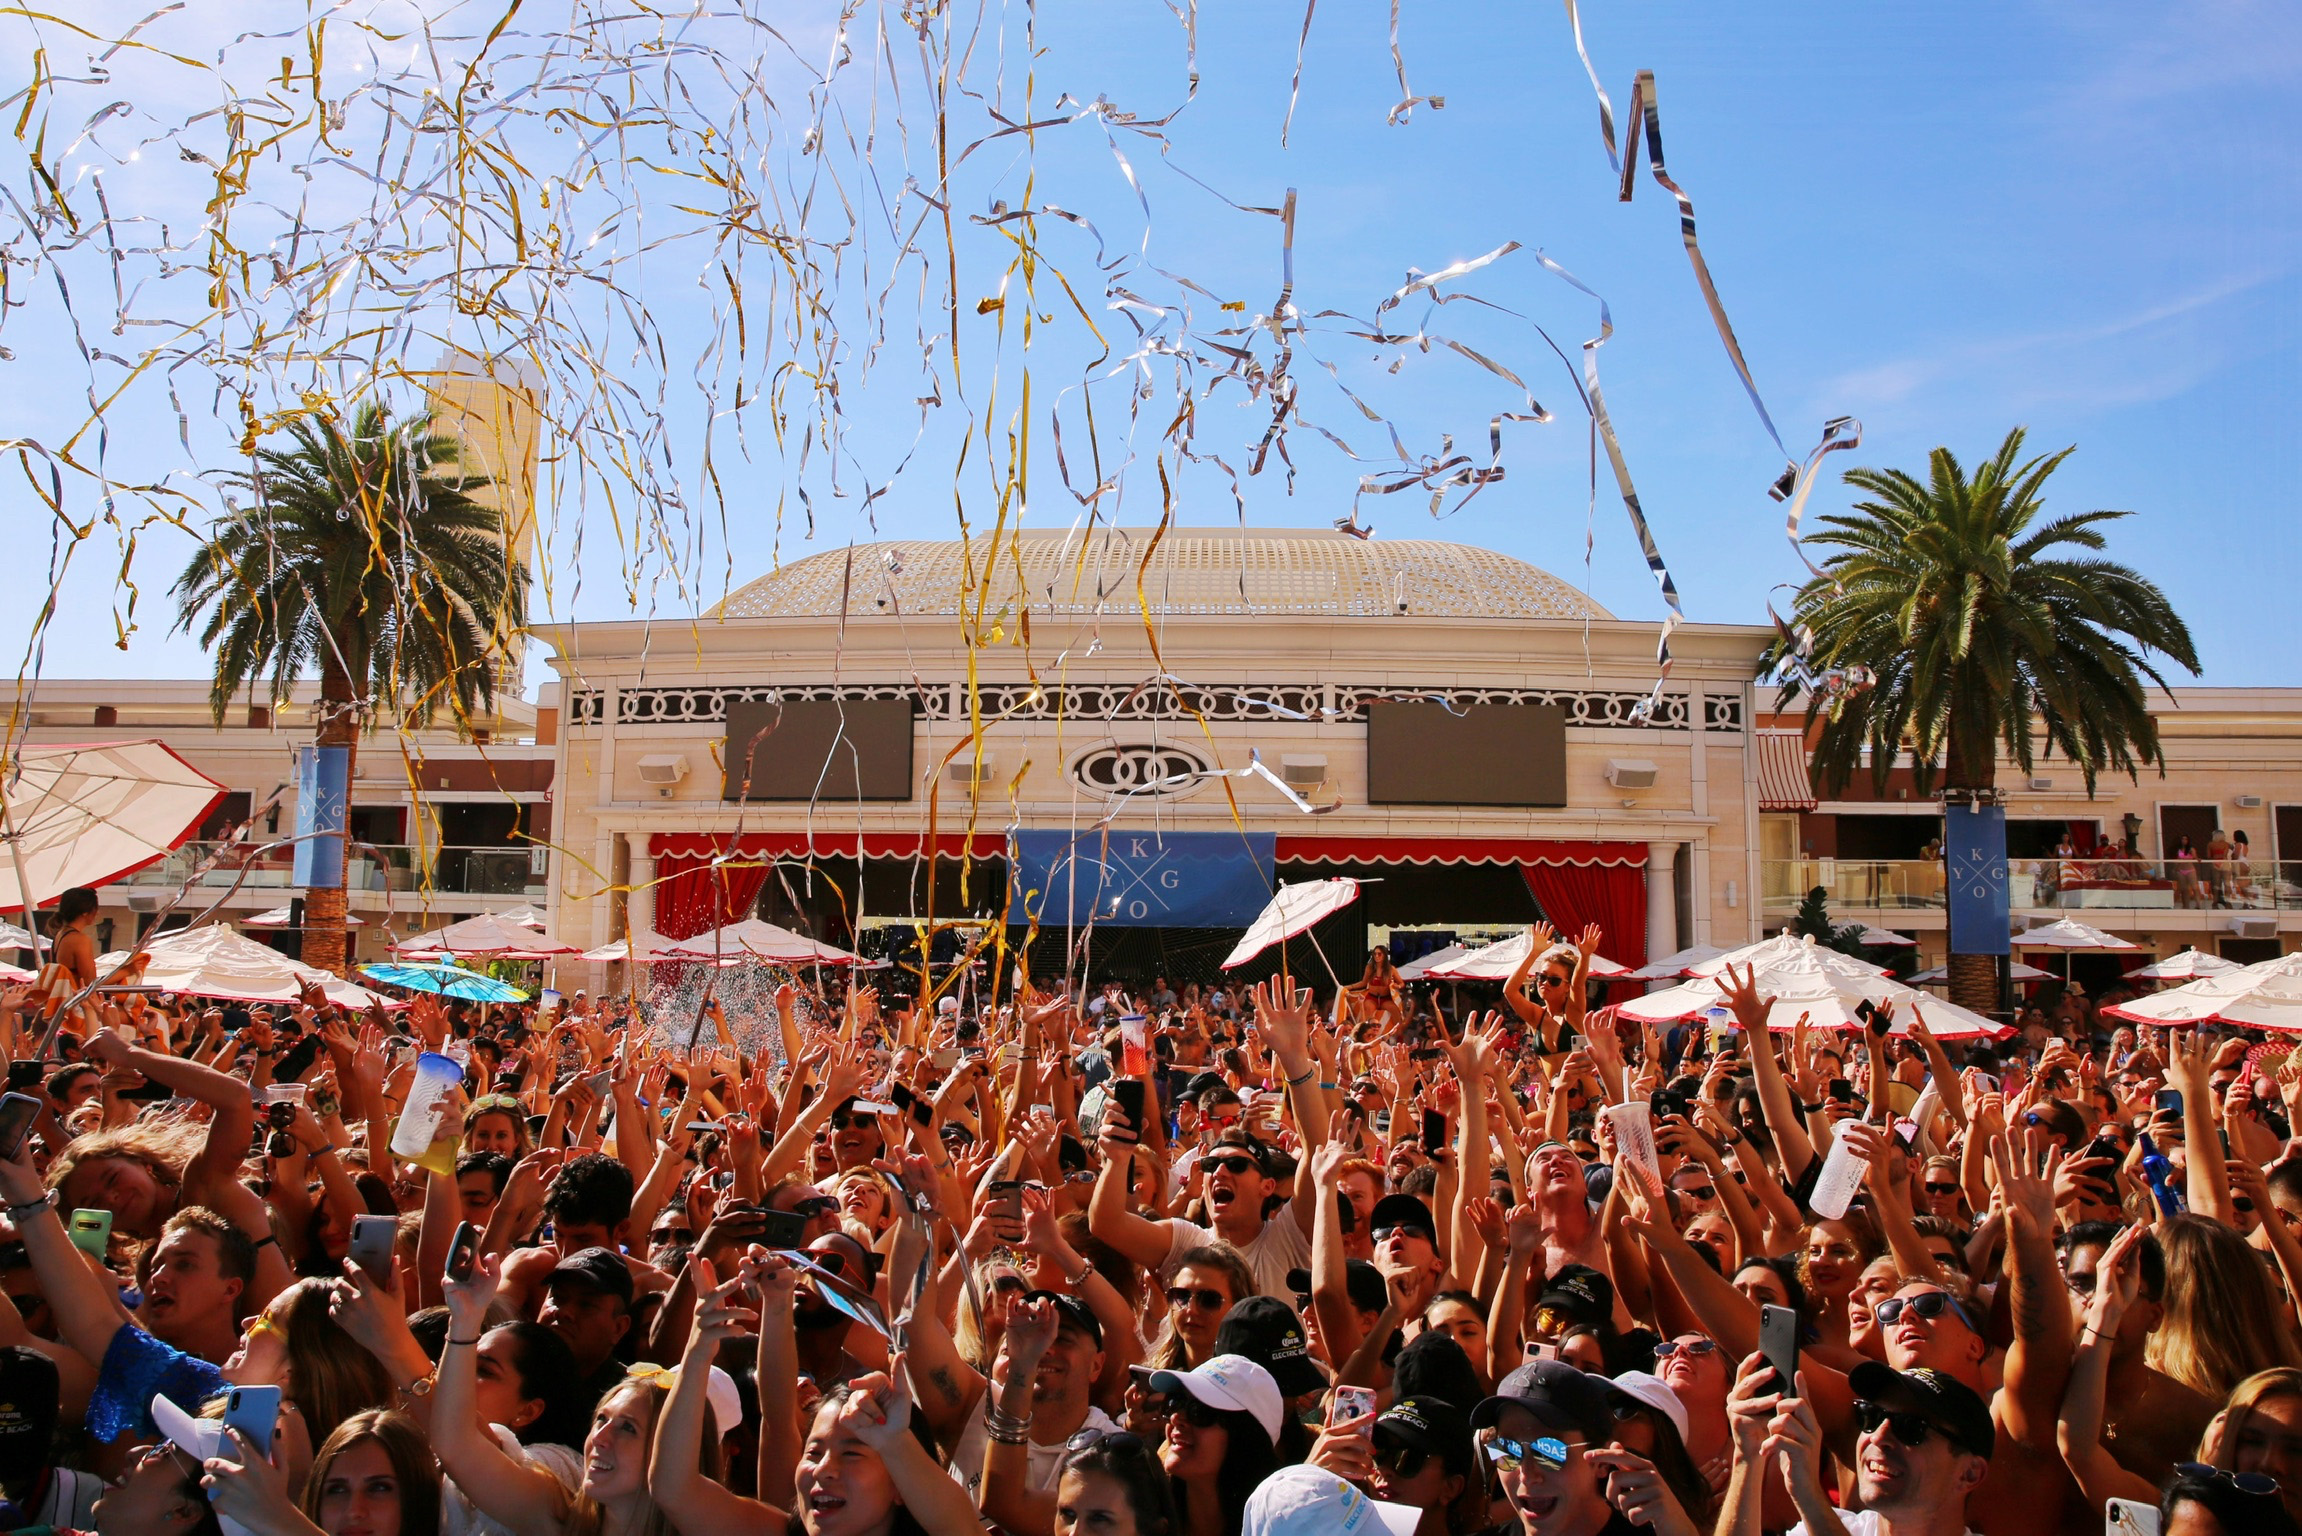 Best Pools & Day Clubs in Vegas